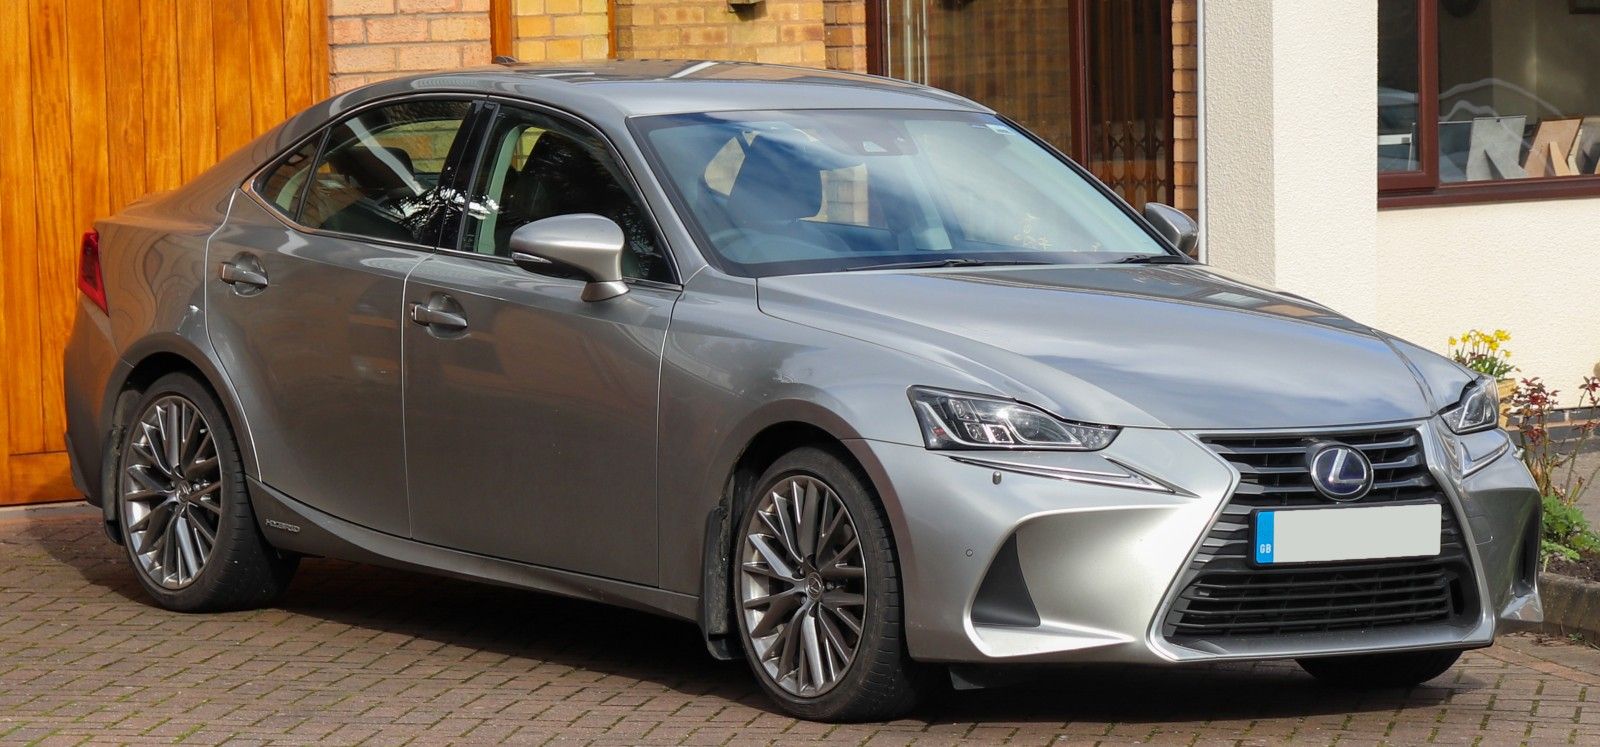 An Image Of A Silver Lexus IS 300